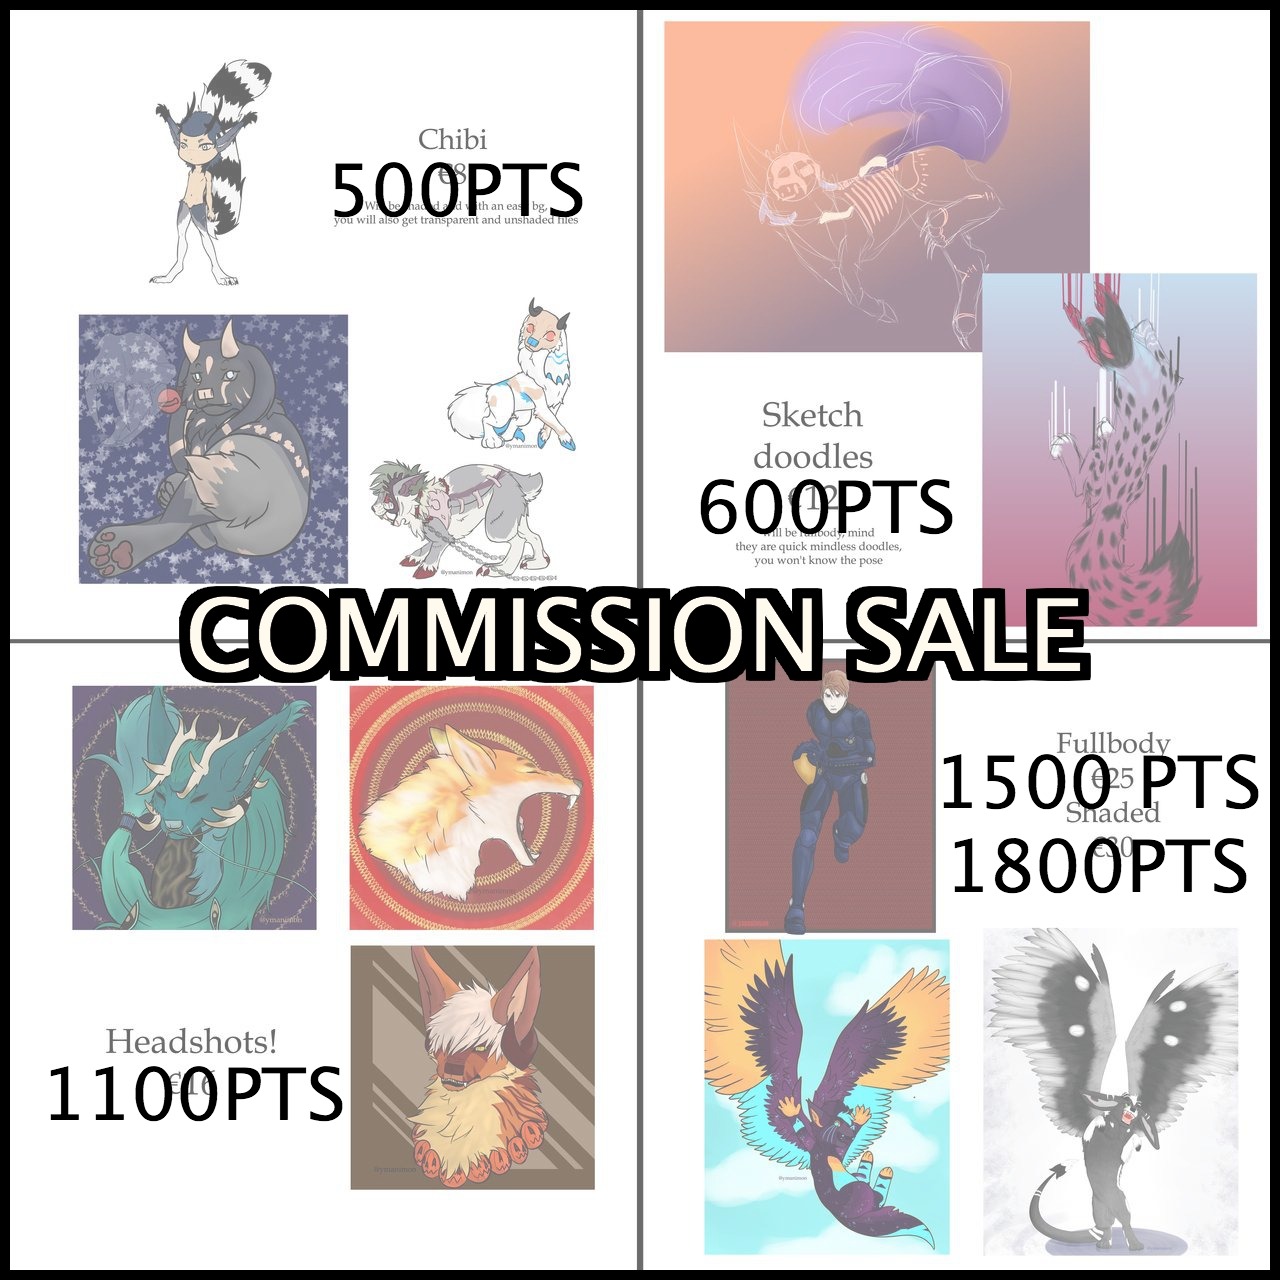 Having a really cheap commission sale over on Deviantart!!
I really want some DA points for some stuff, so go check it out ->
https://www.deviantart.com/manivur2/art/COMMISSION-SALE-831010630
Also having a character sale! Want all kids gone because...